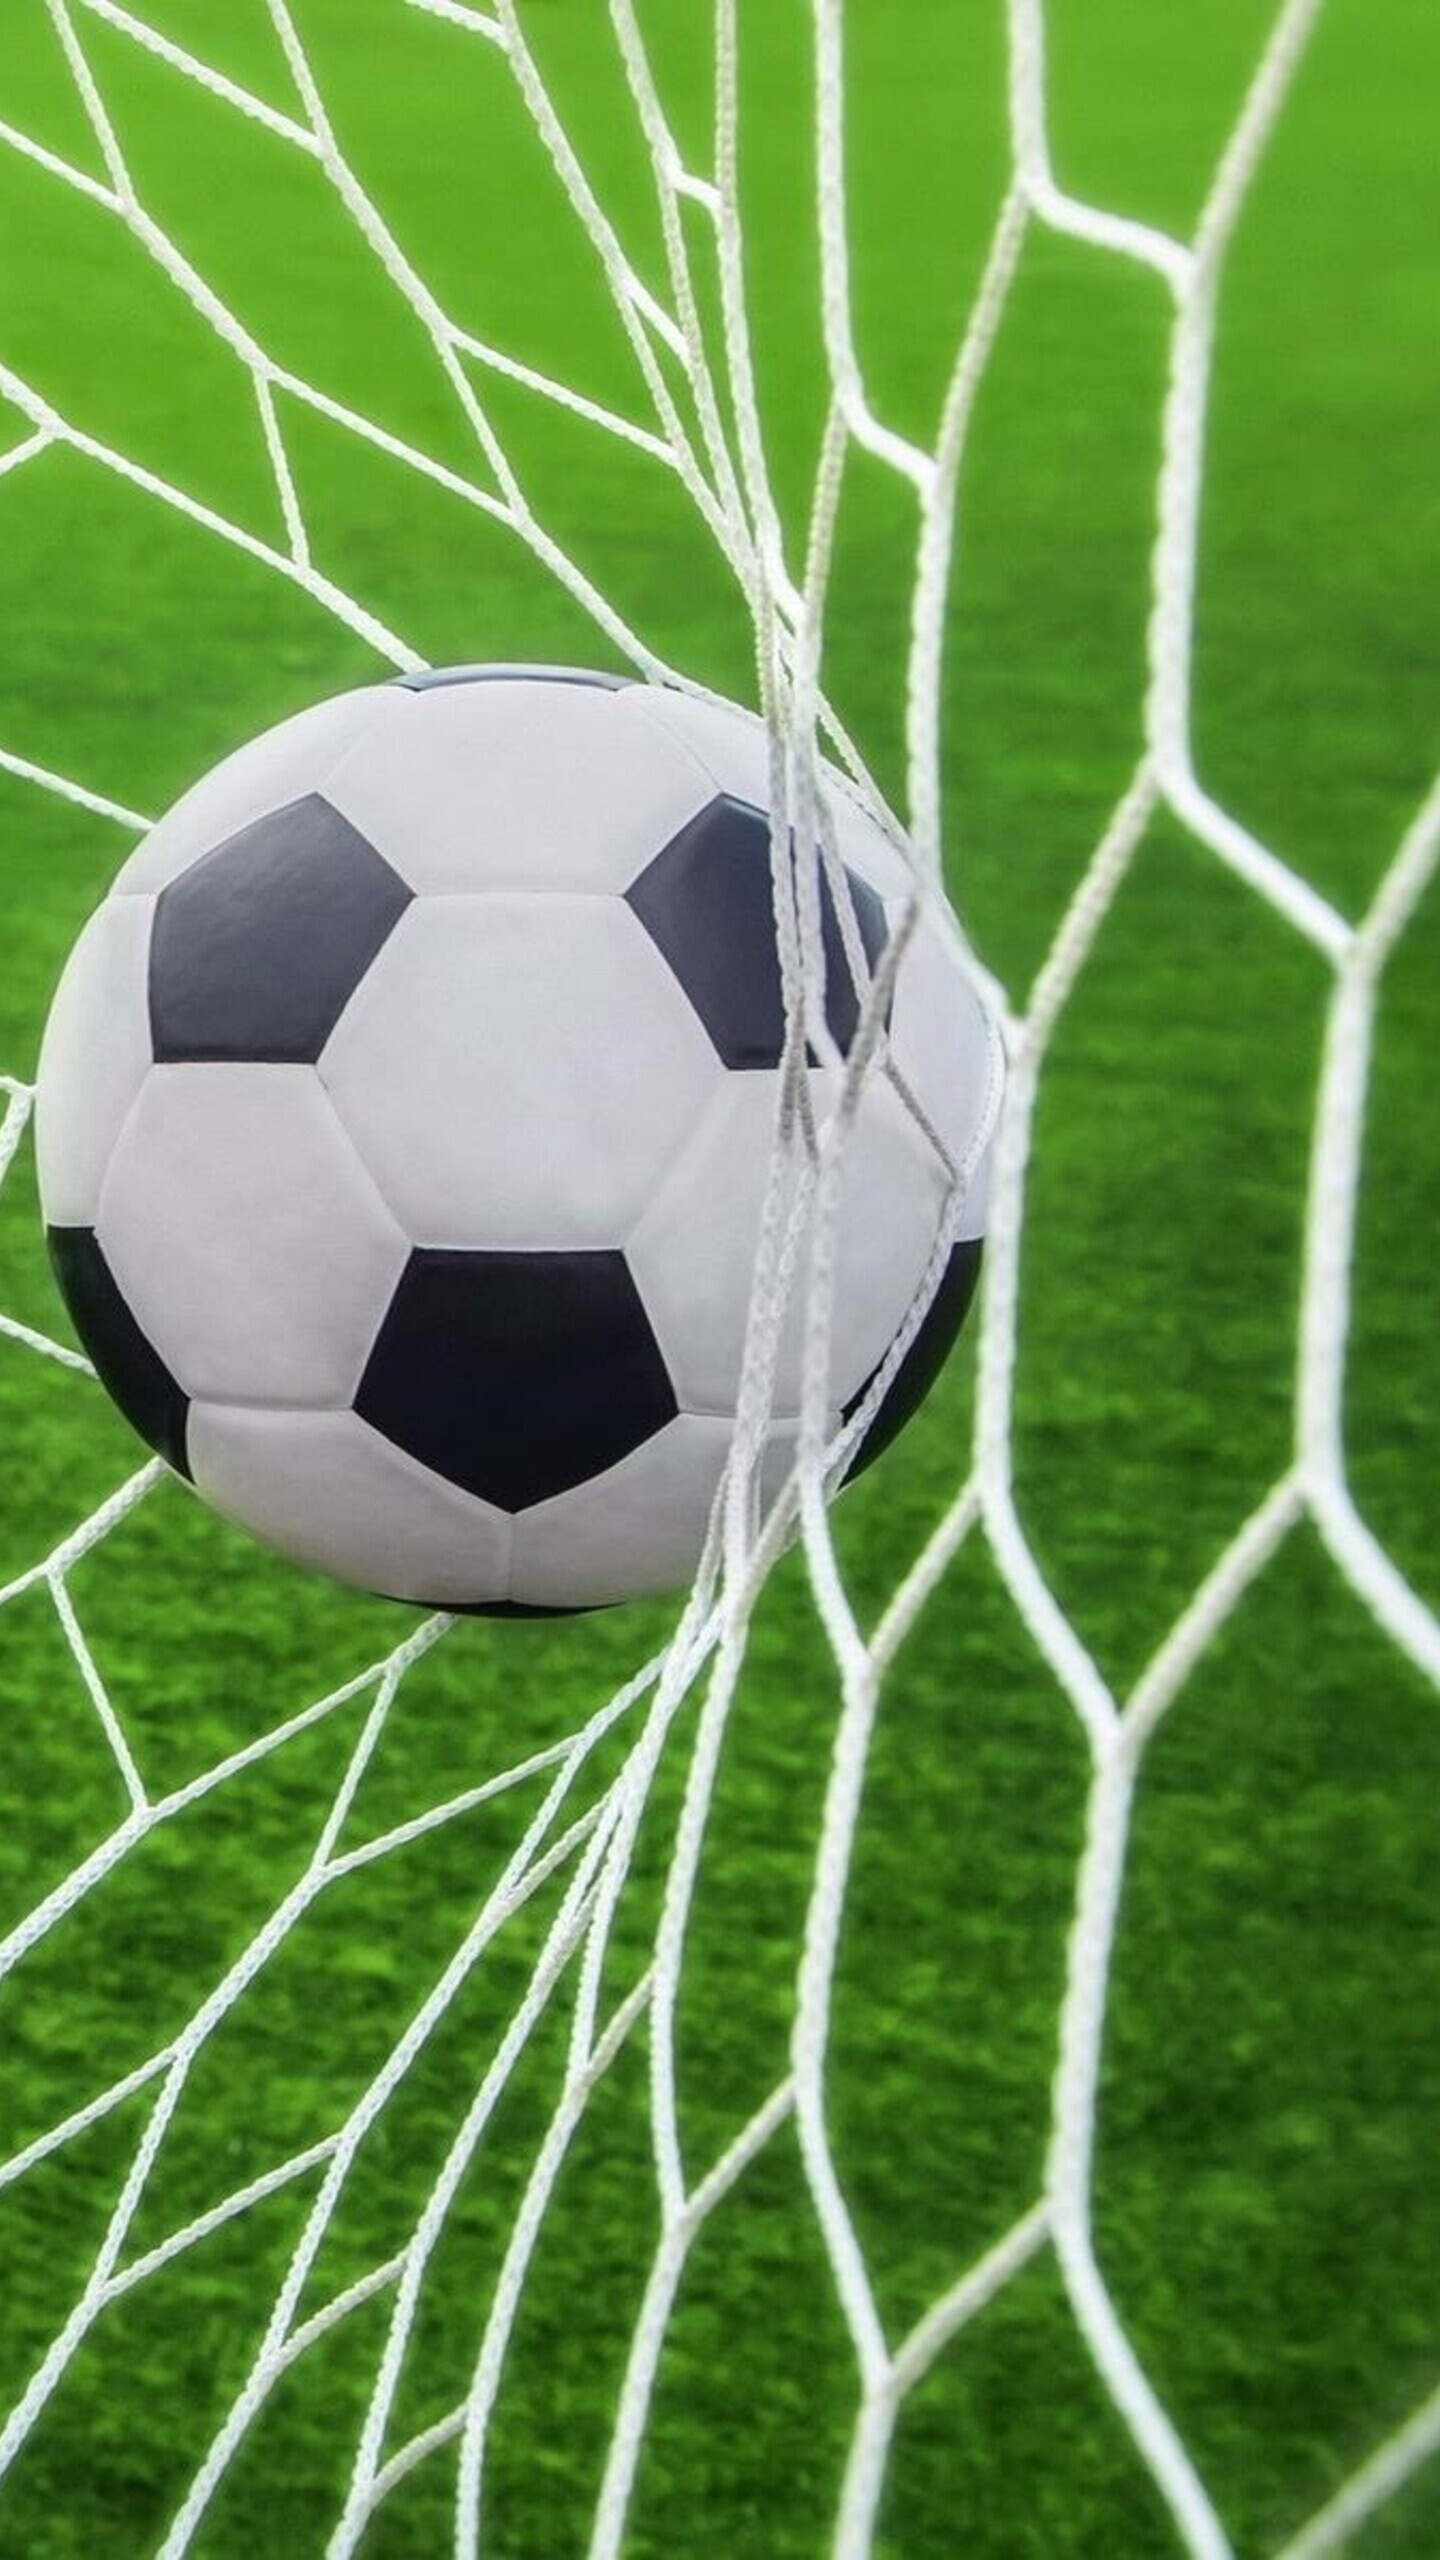 Goal (Sports): Soccer ball, Team sport, Football goal post nets, Made to be hung behind the goal post to catch the footballs. 1440x2560 HD Background.